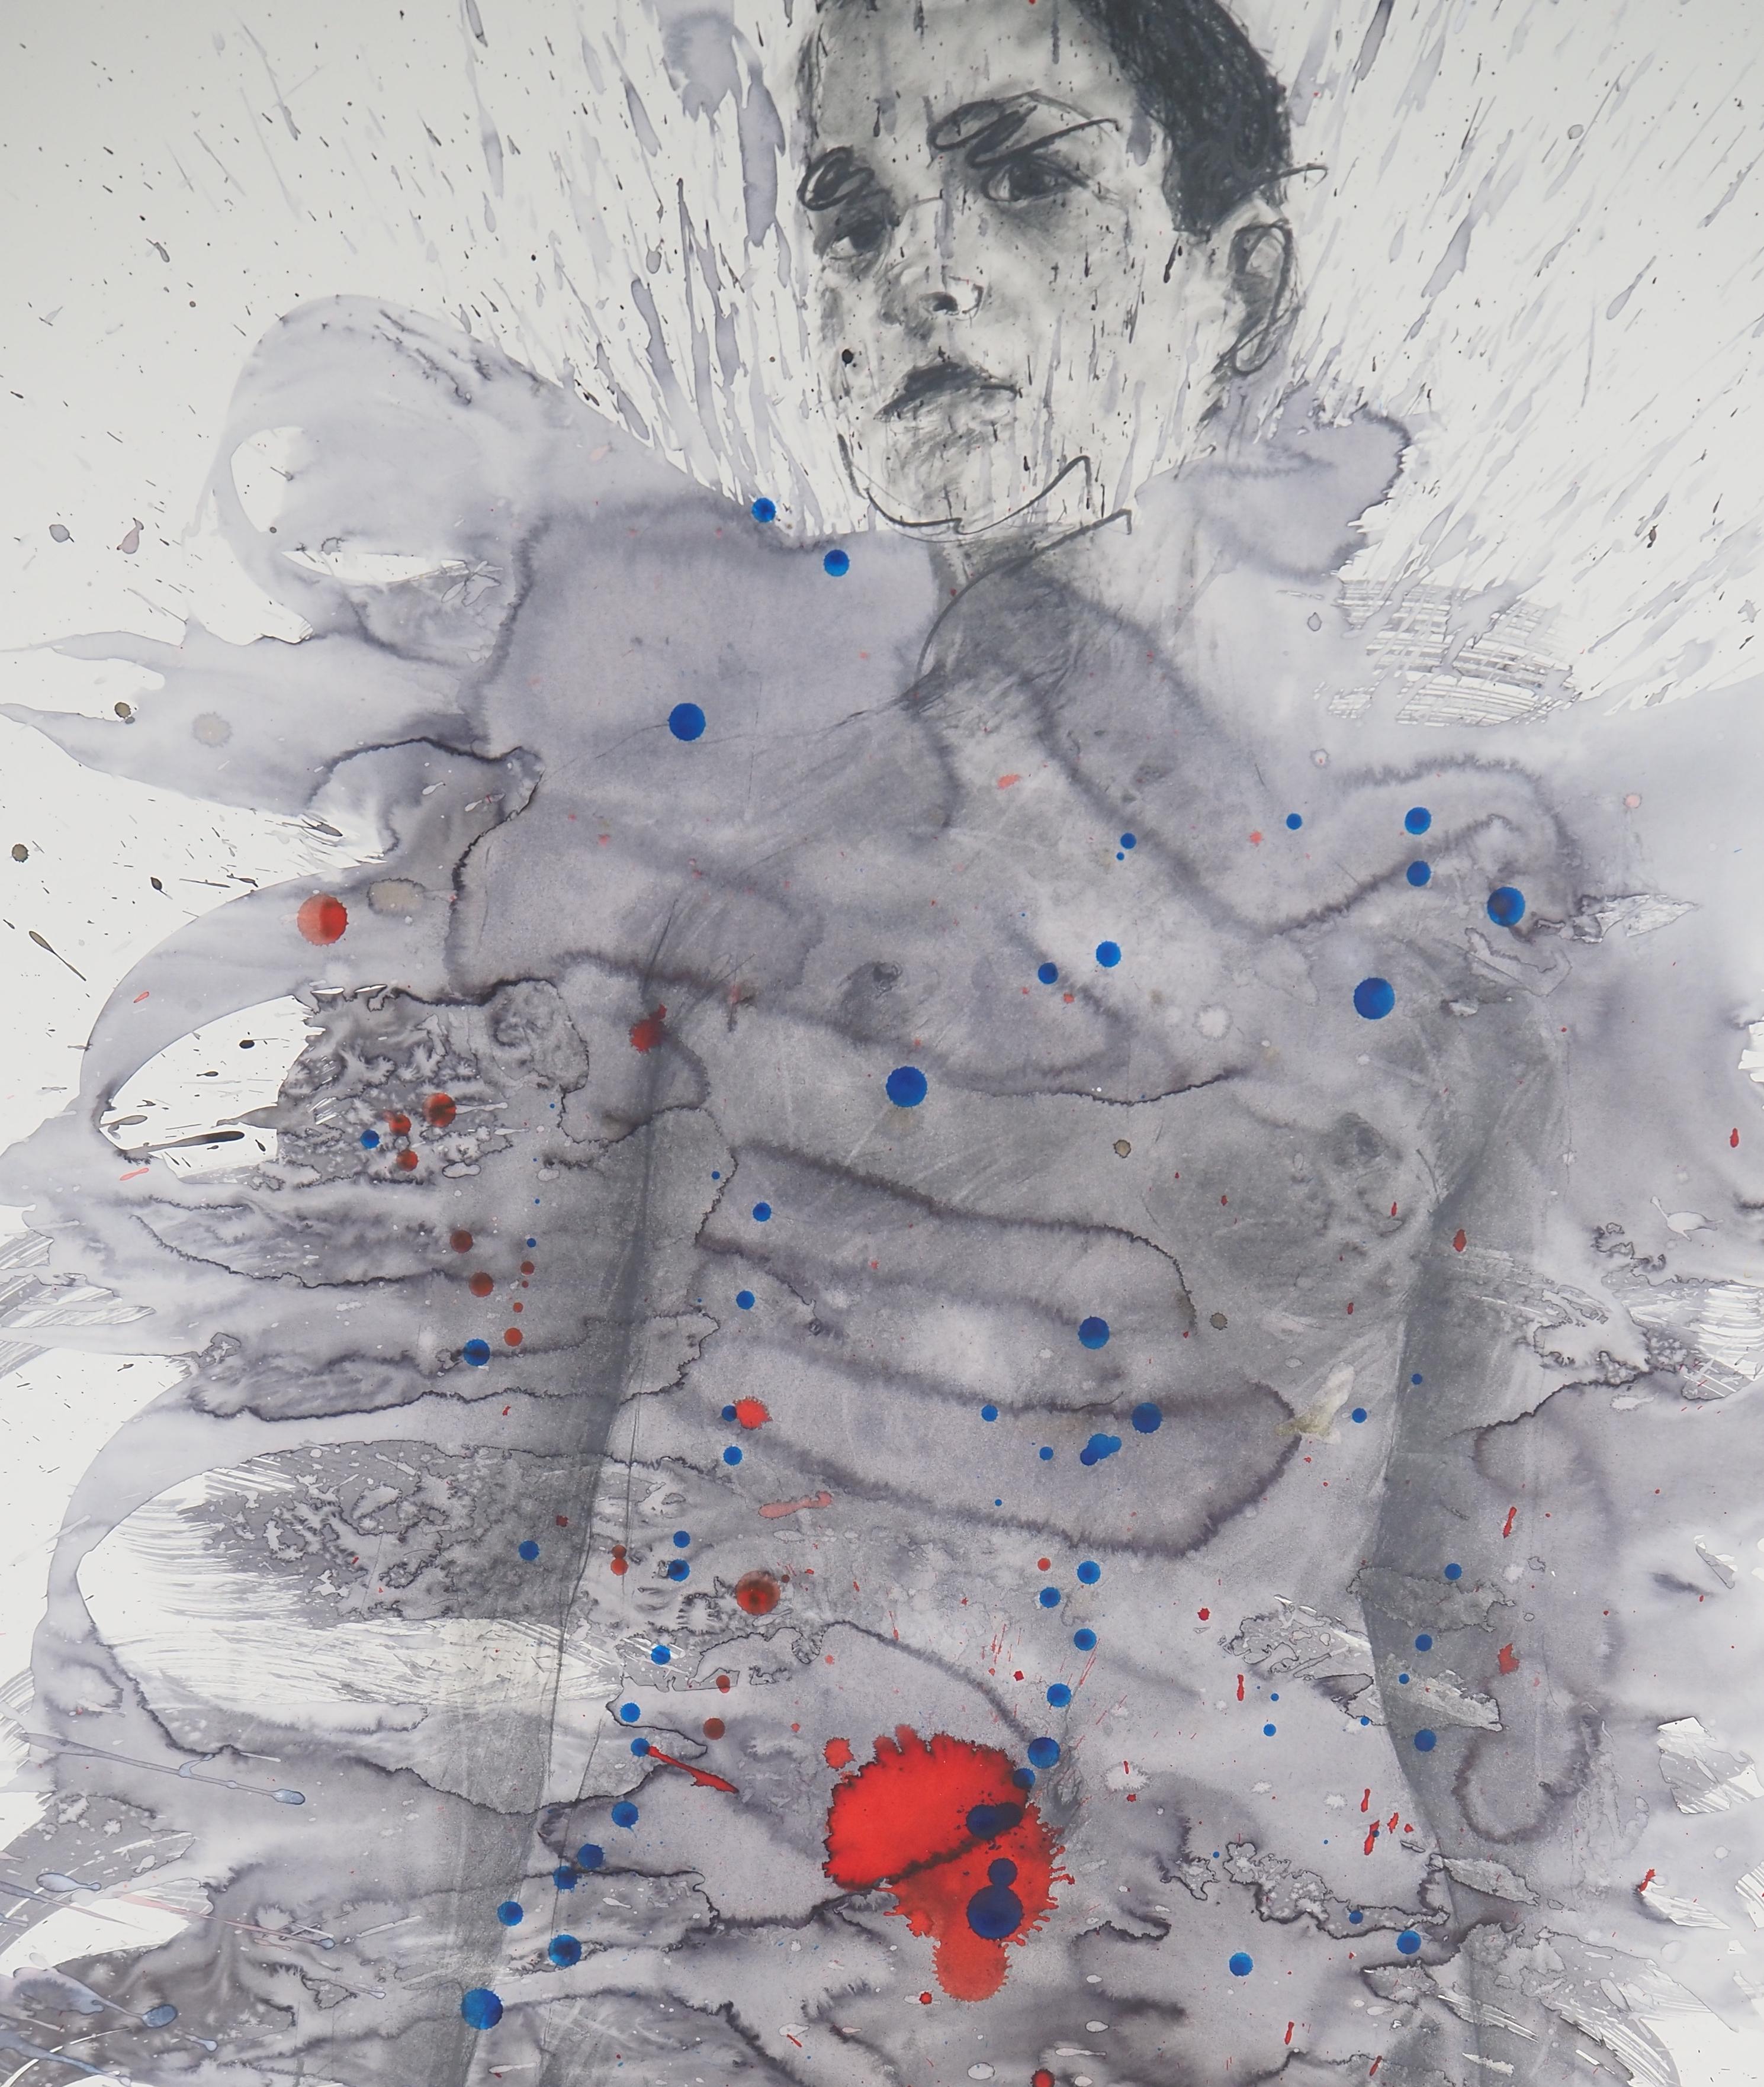 Philippe Pasqua (1965-)
Splash Girl, 2010

Mixed medias : ink, watercolor and acrylic painting
Signed bottom right
Authenticated with the artist red stamp
On vellum mounted on light board 112 x 84 cm

Excellent condition